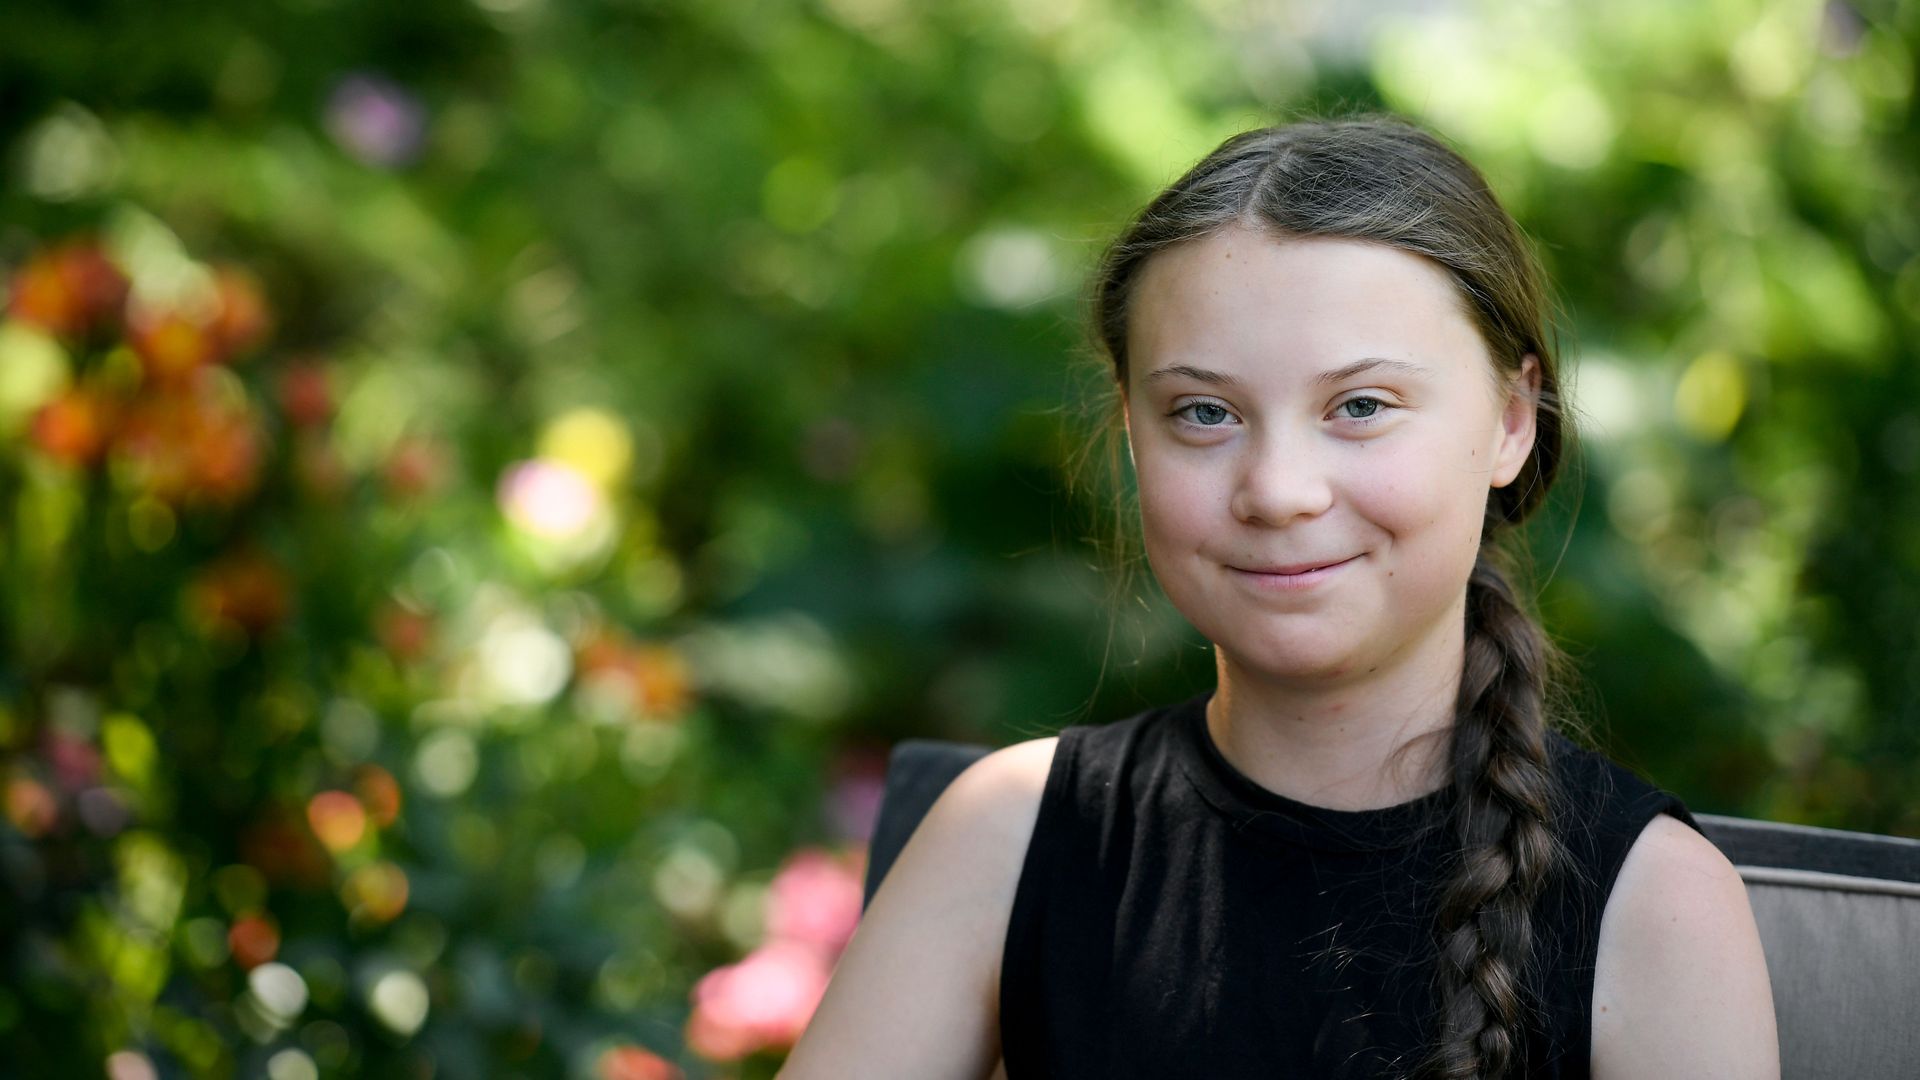 Swedish climate activist Greta Thunberg looks on during a meeting in the garden of the Hotel de Lassay ahead of a visit of the French National Assembly.